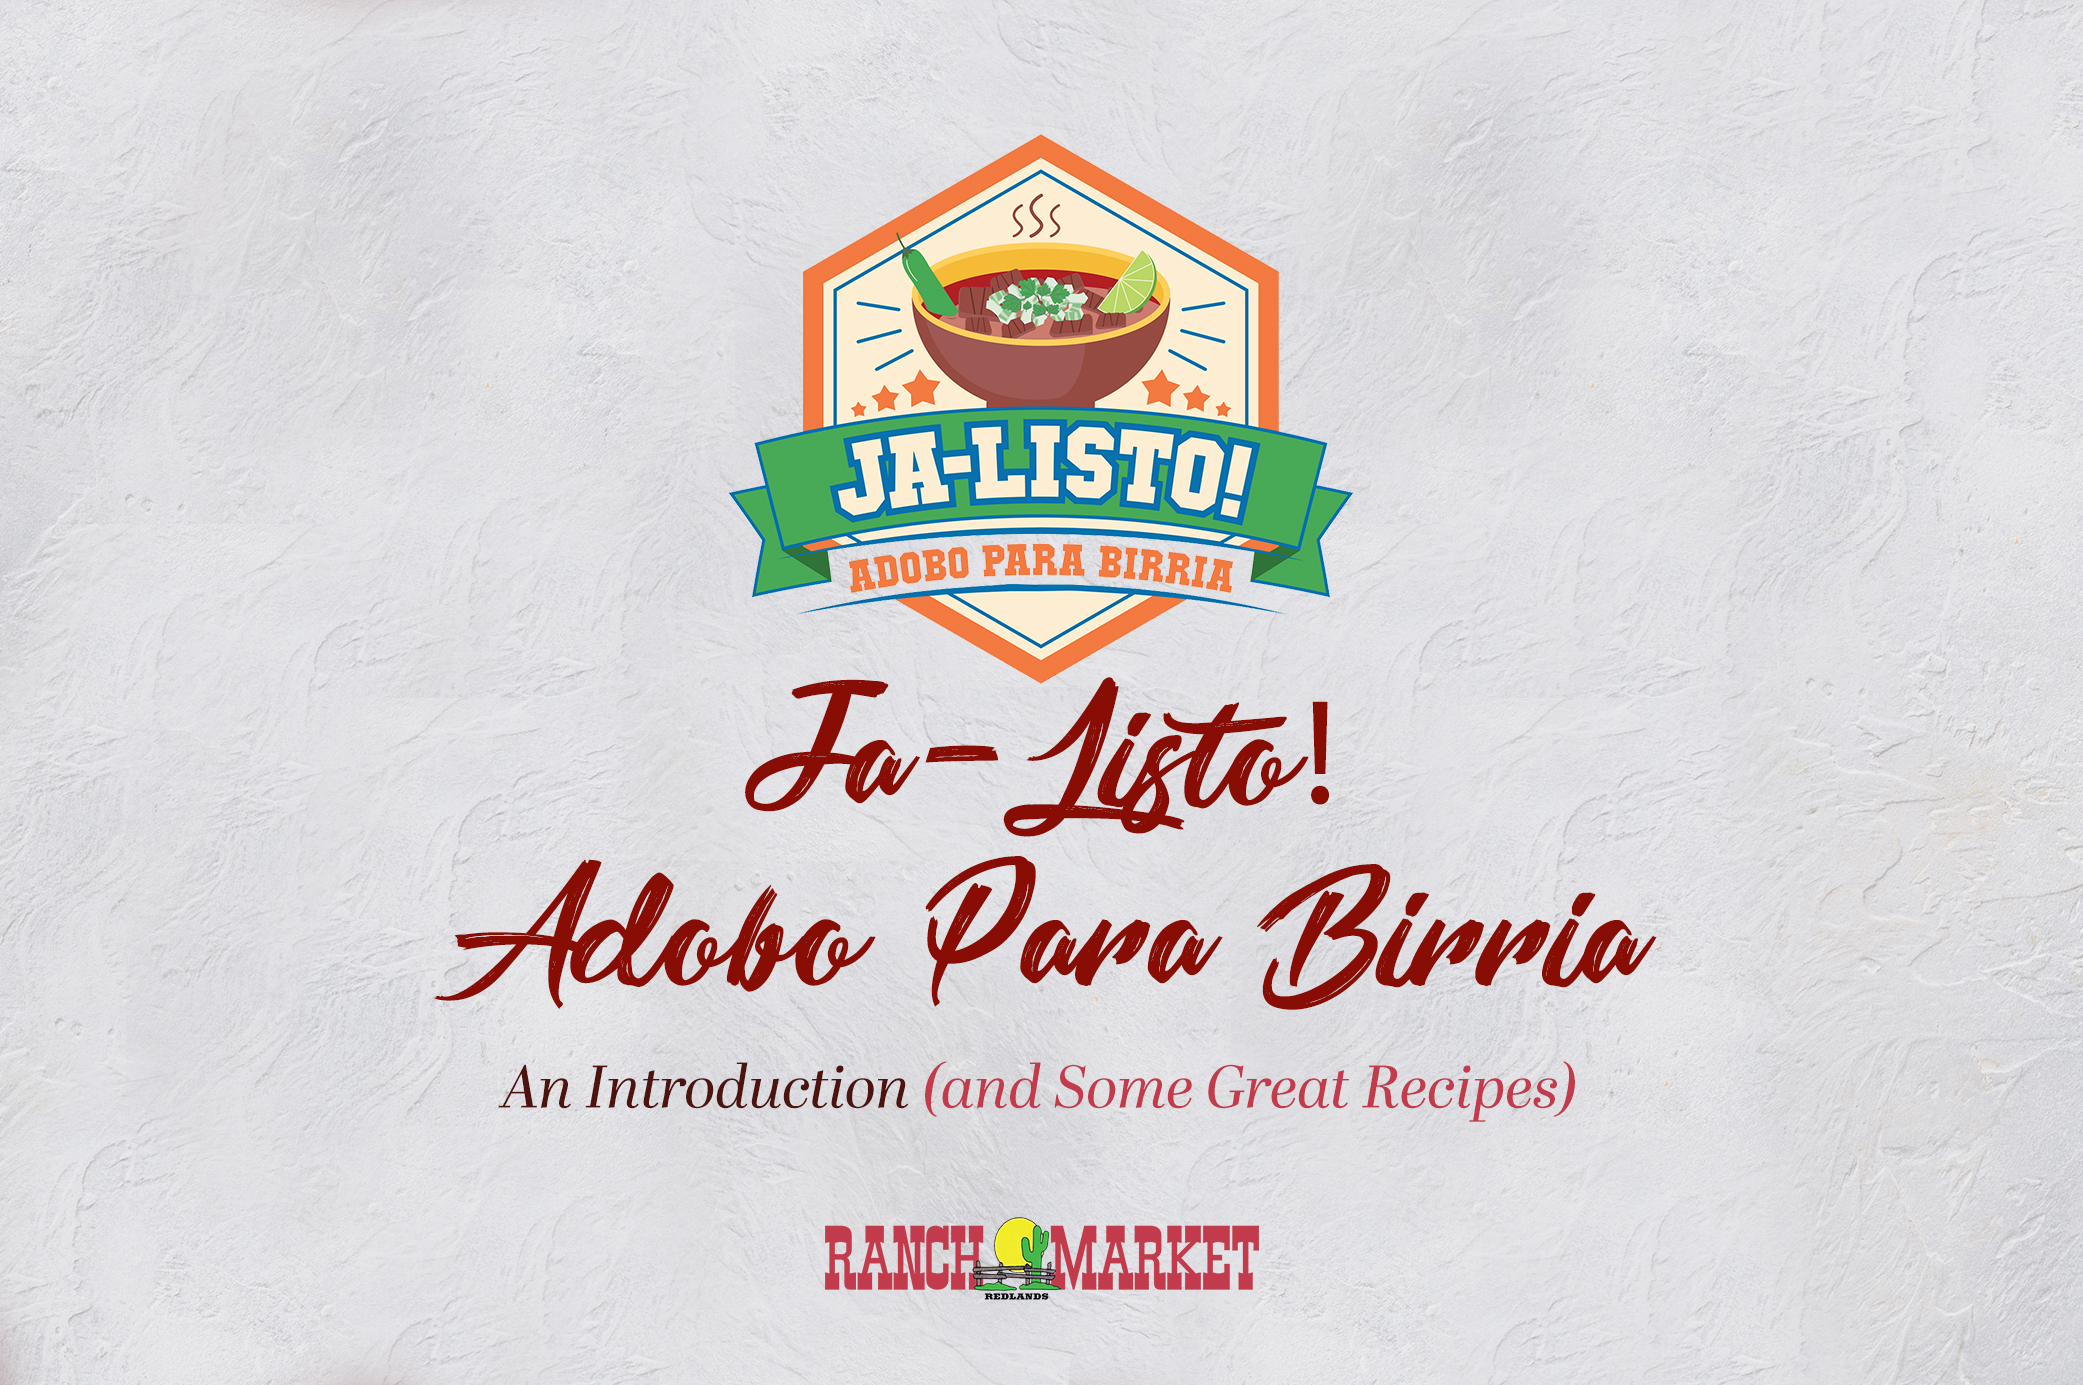 Ja-Listo! Adobo Para Birria: An Introduction (and Some Great Recipes) -  Redlands Ranch Market